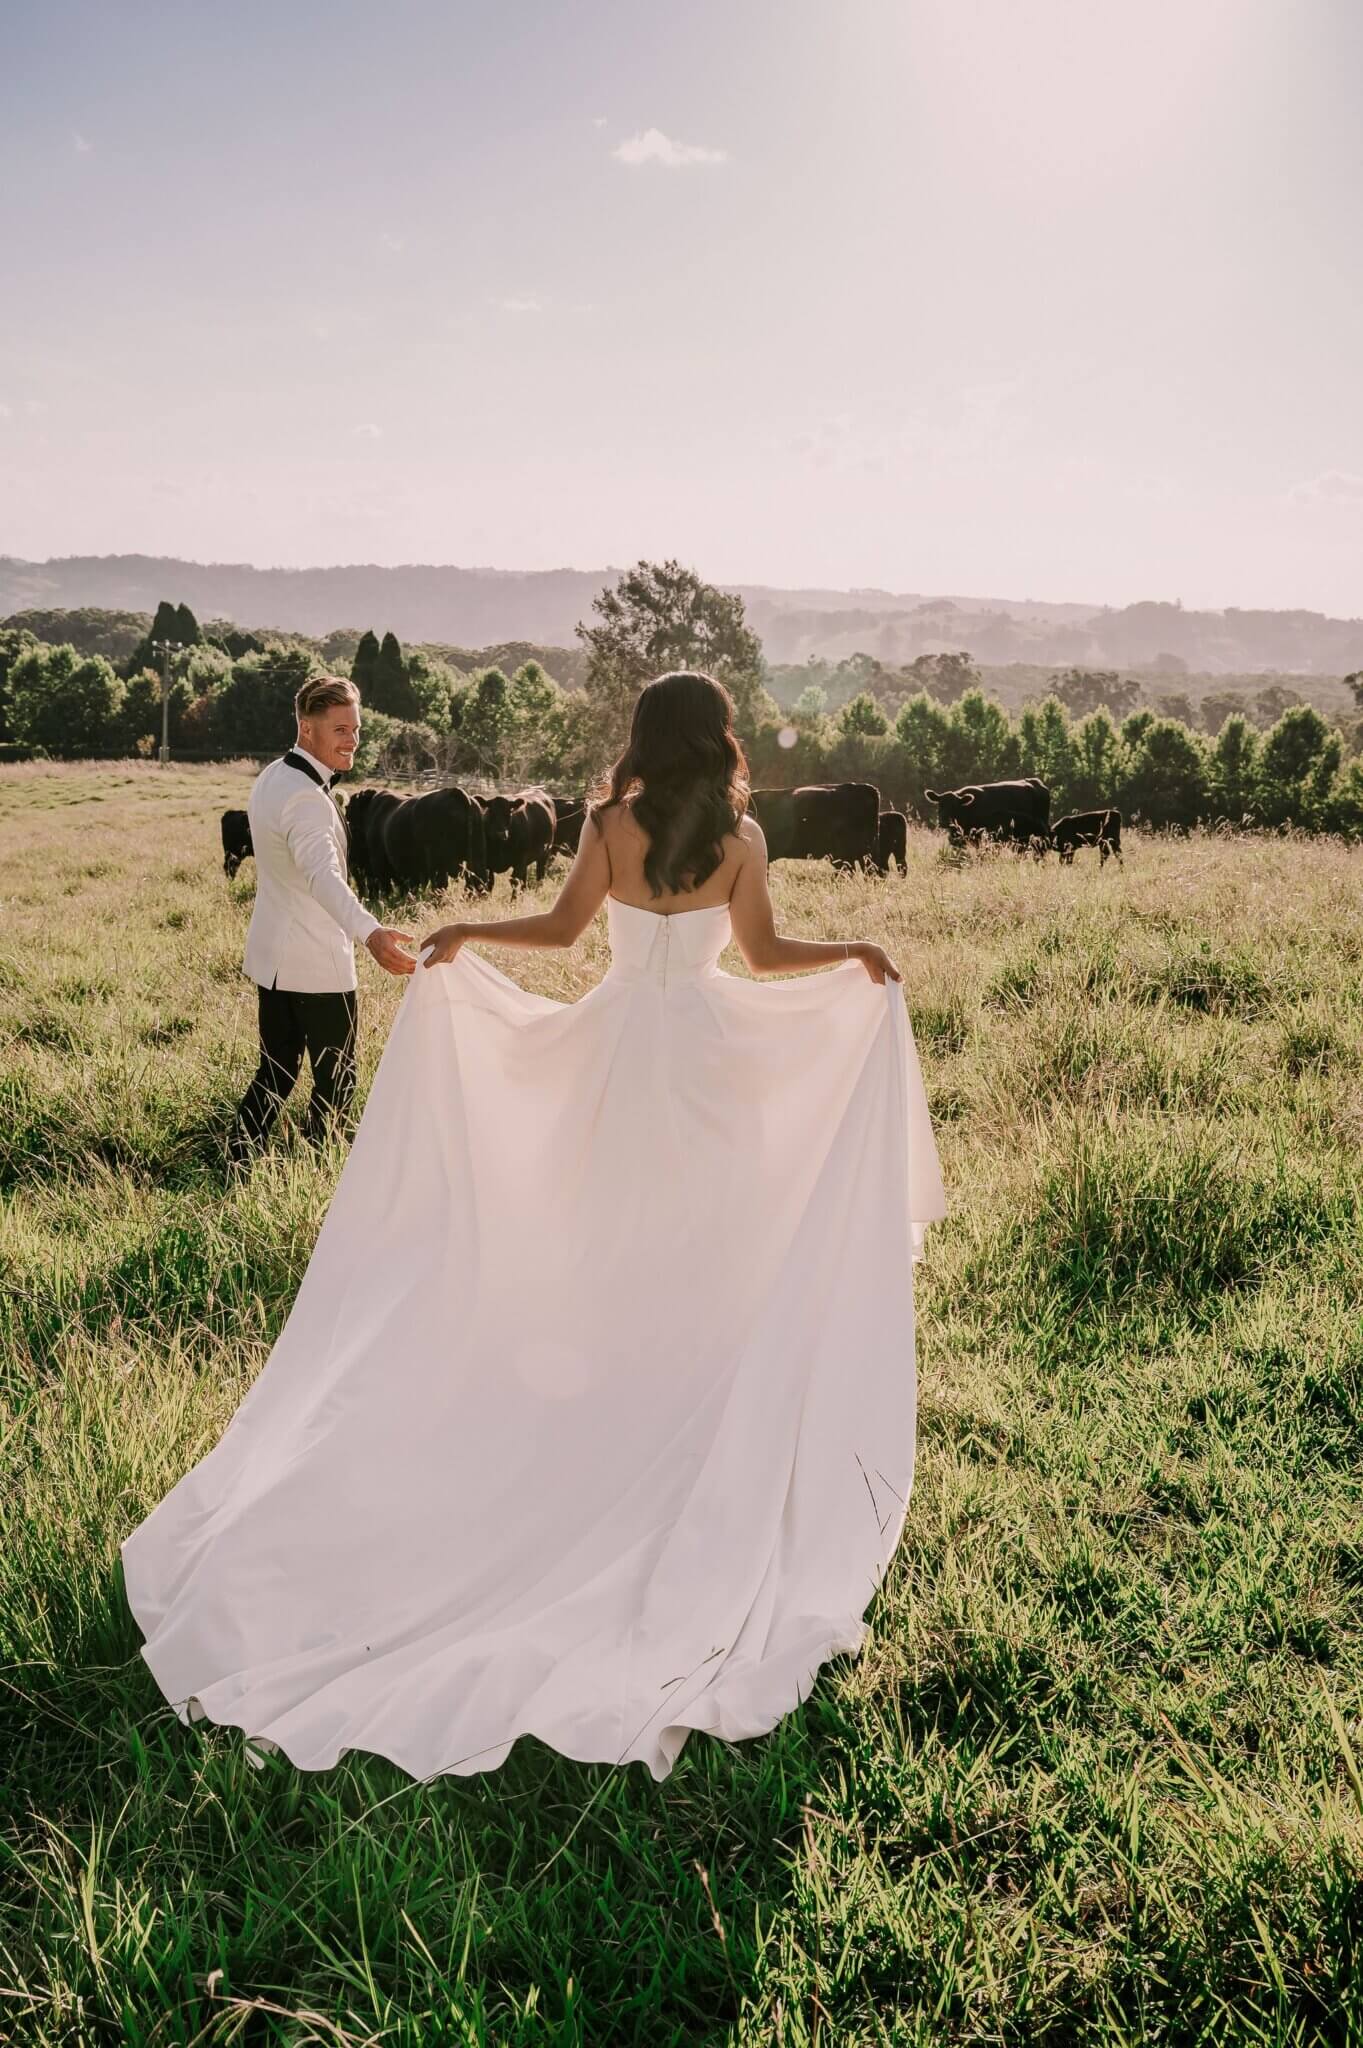 A bride and groom in a pastoral setting, with the bride's gown flowing in the wind, creating a striking image against the backdrop of grazing cattle and rolling hills